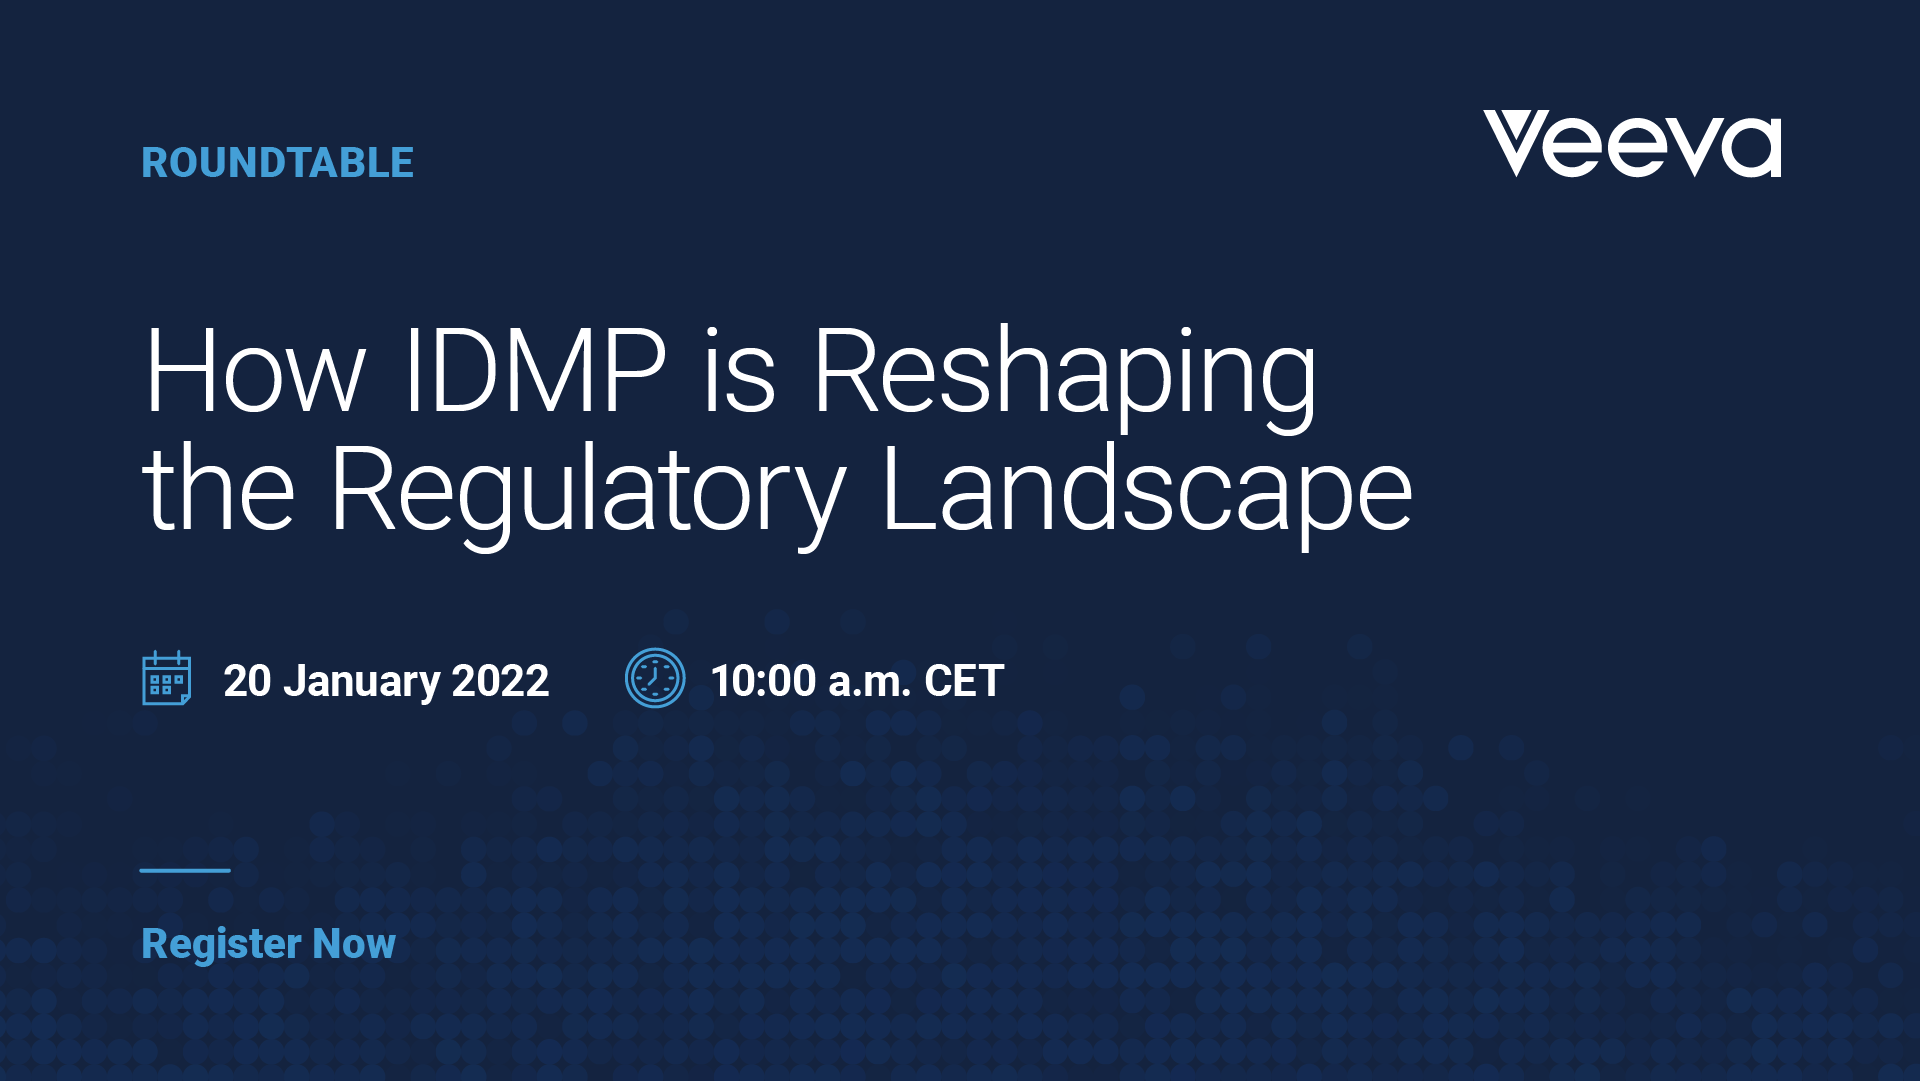 Find out how IDMP is reshaping the regulatory landscape in Veeva's webinar on January 20th - #BHHMembersInitiatives